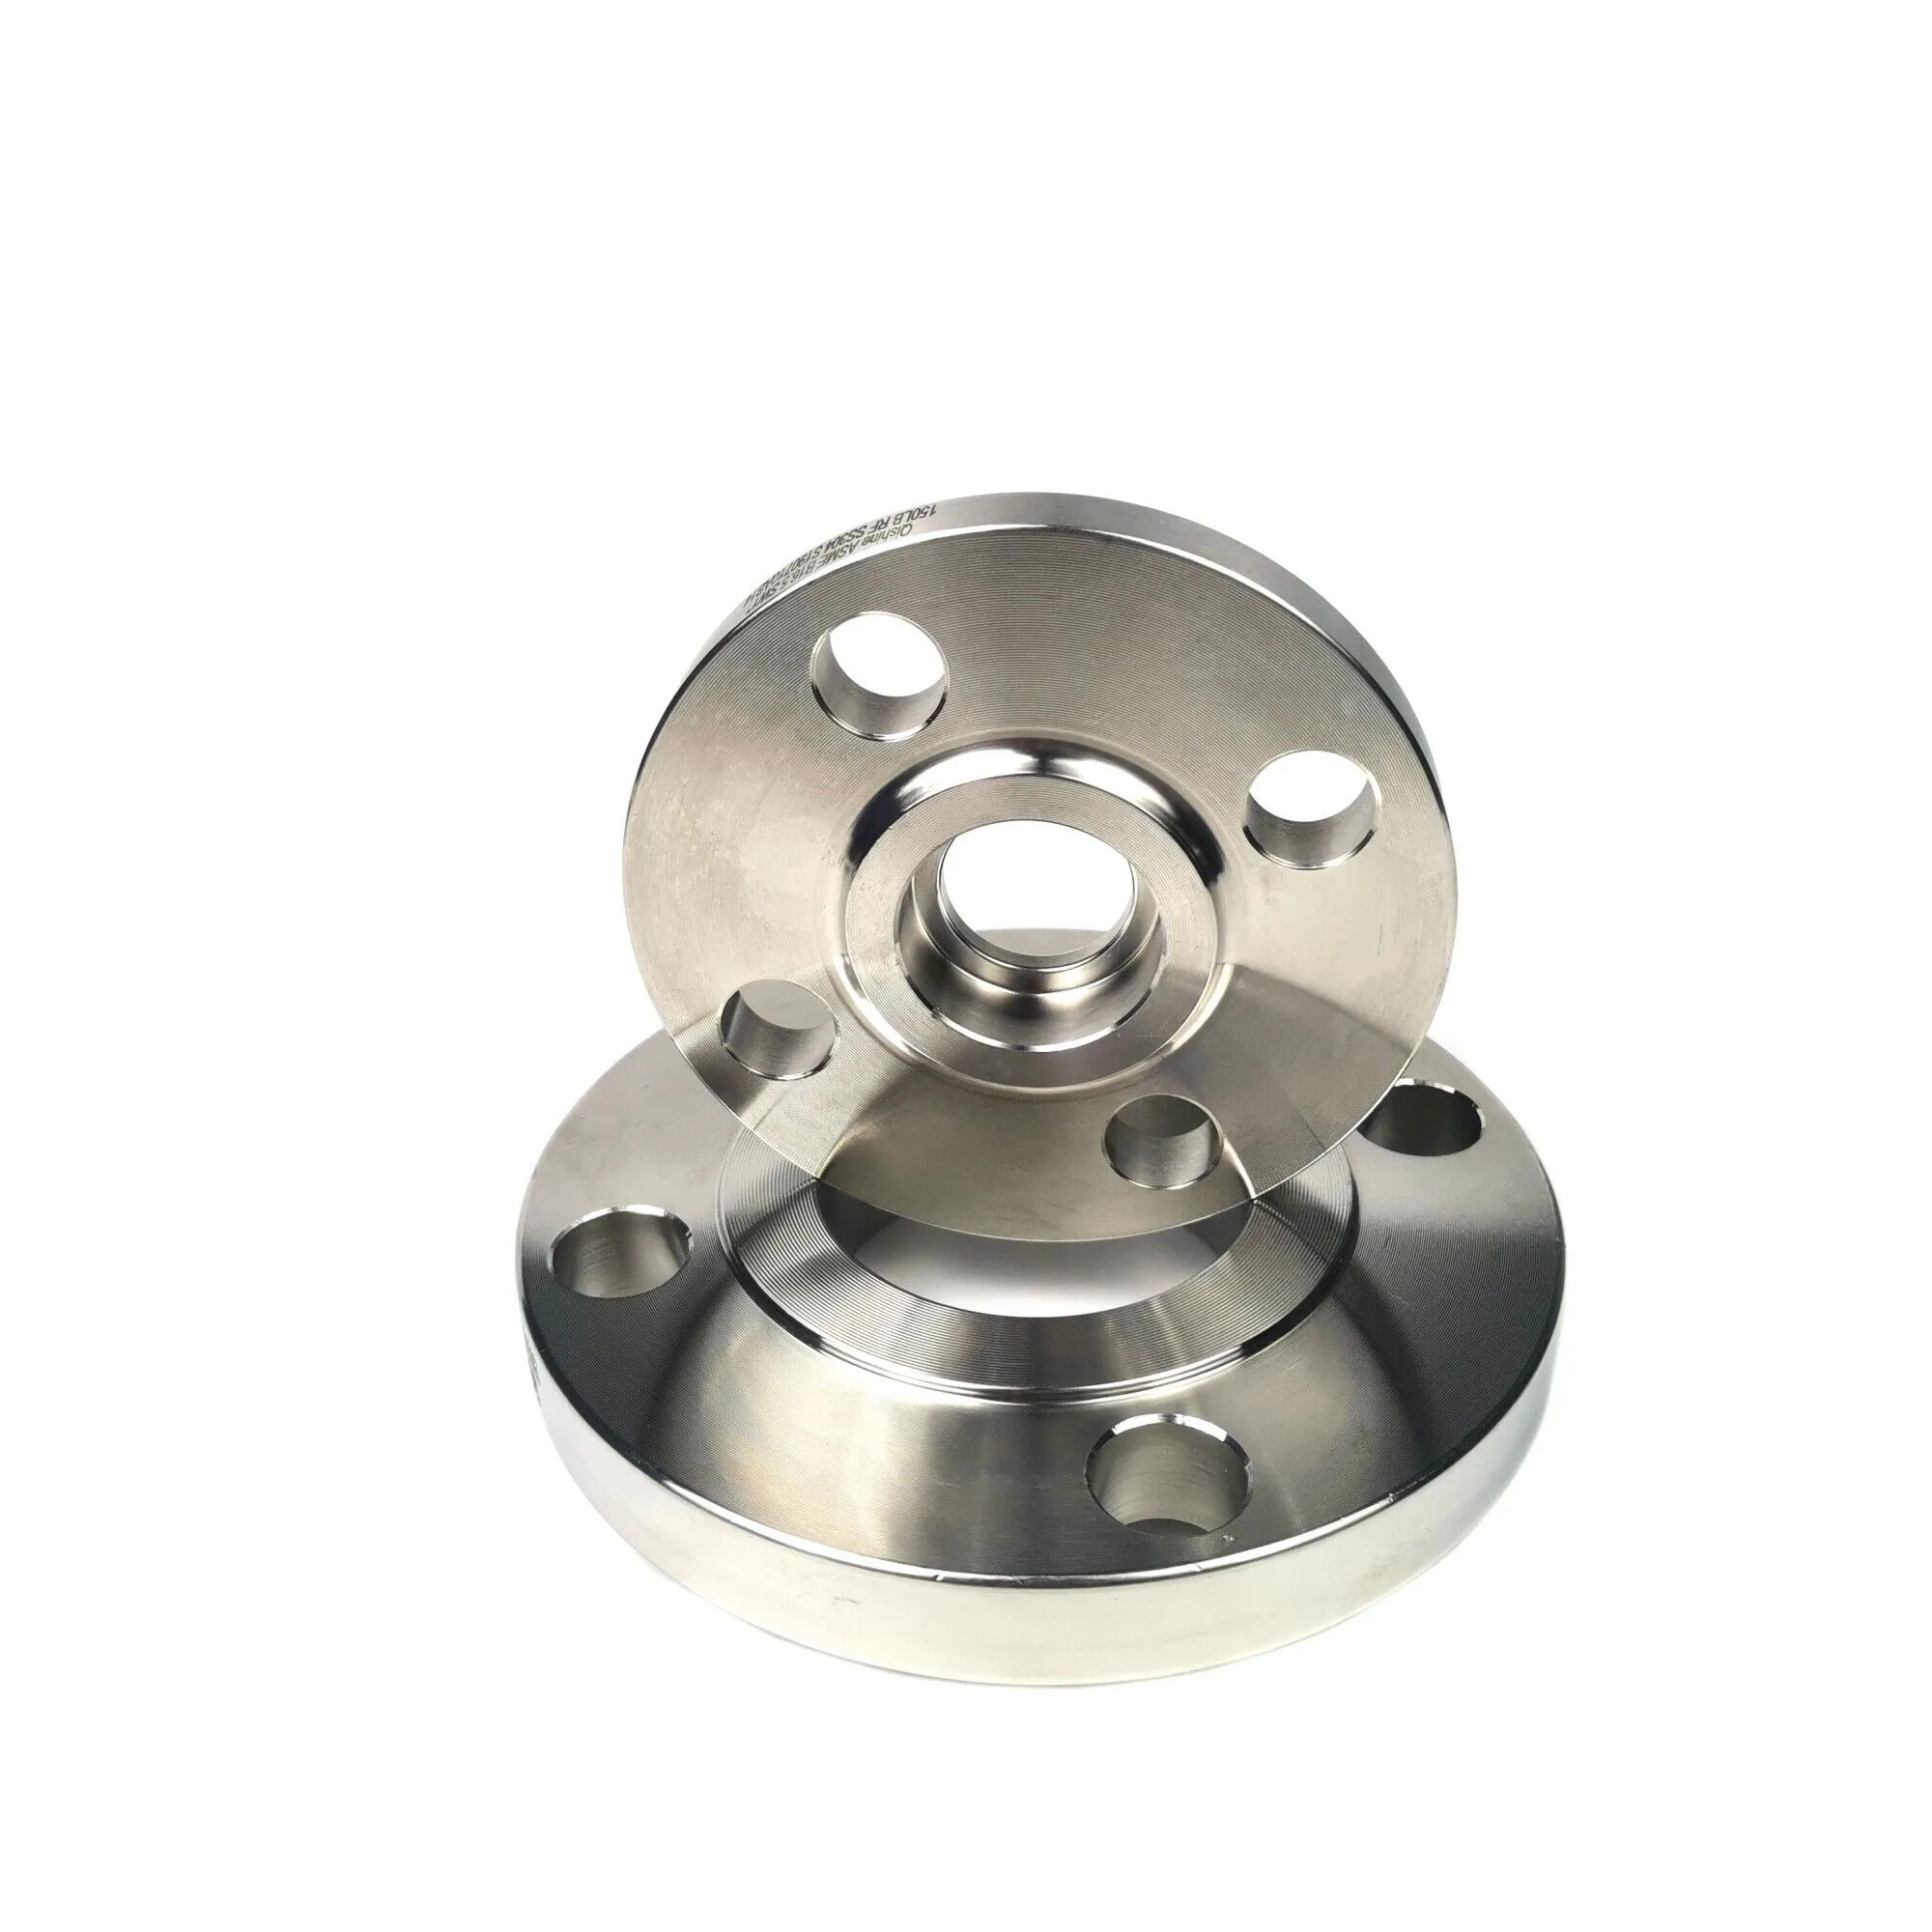 Class 900 LB SW Flange, ASME B16.5, Stainless Steel, 1 Inch